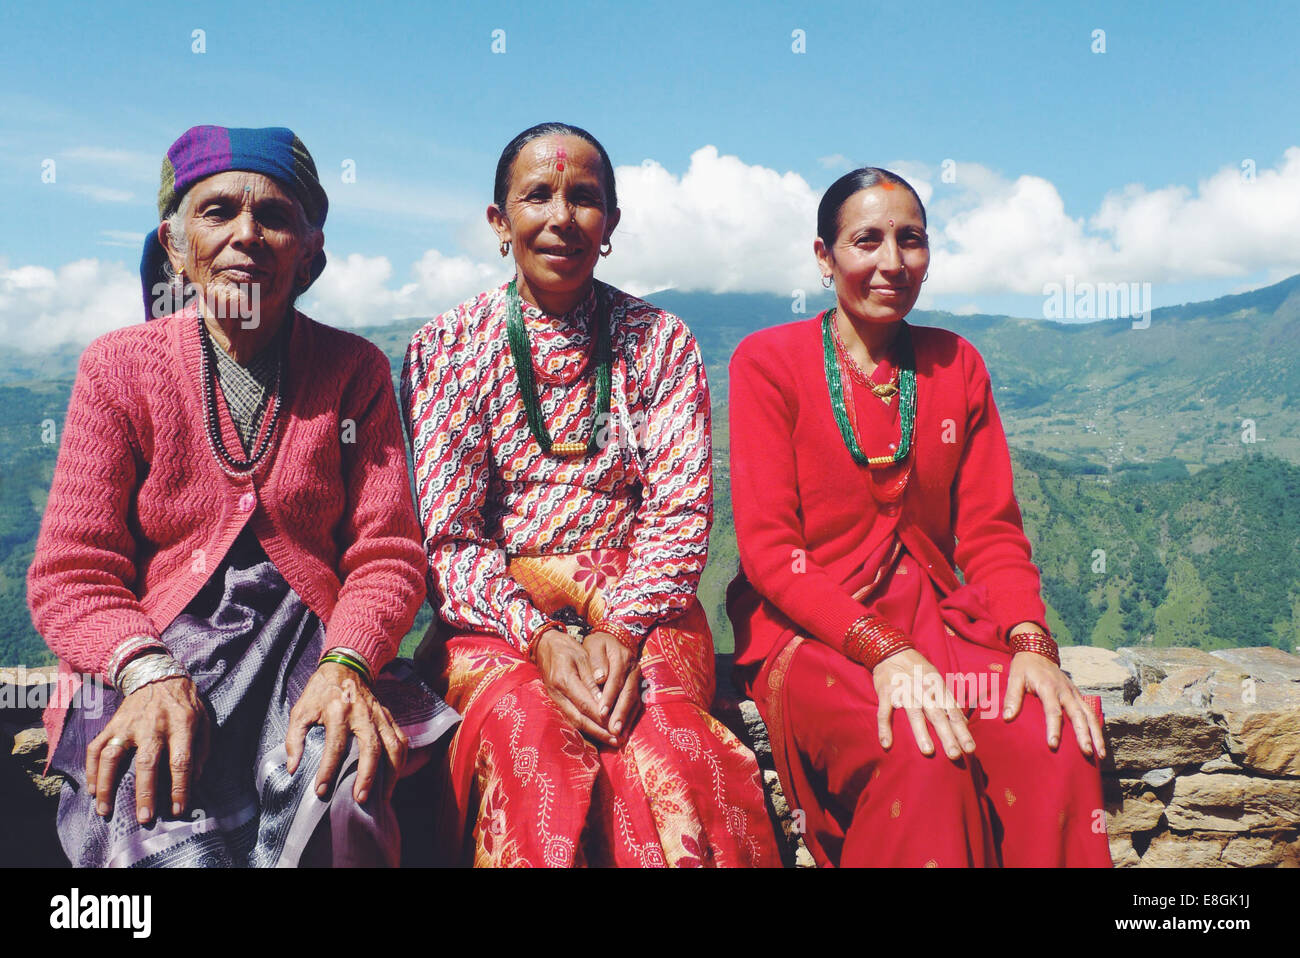 Portrait of three local Nepalese women sitting on a wall in a mountain village, Nepal Stock Photo